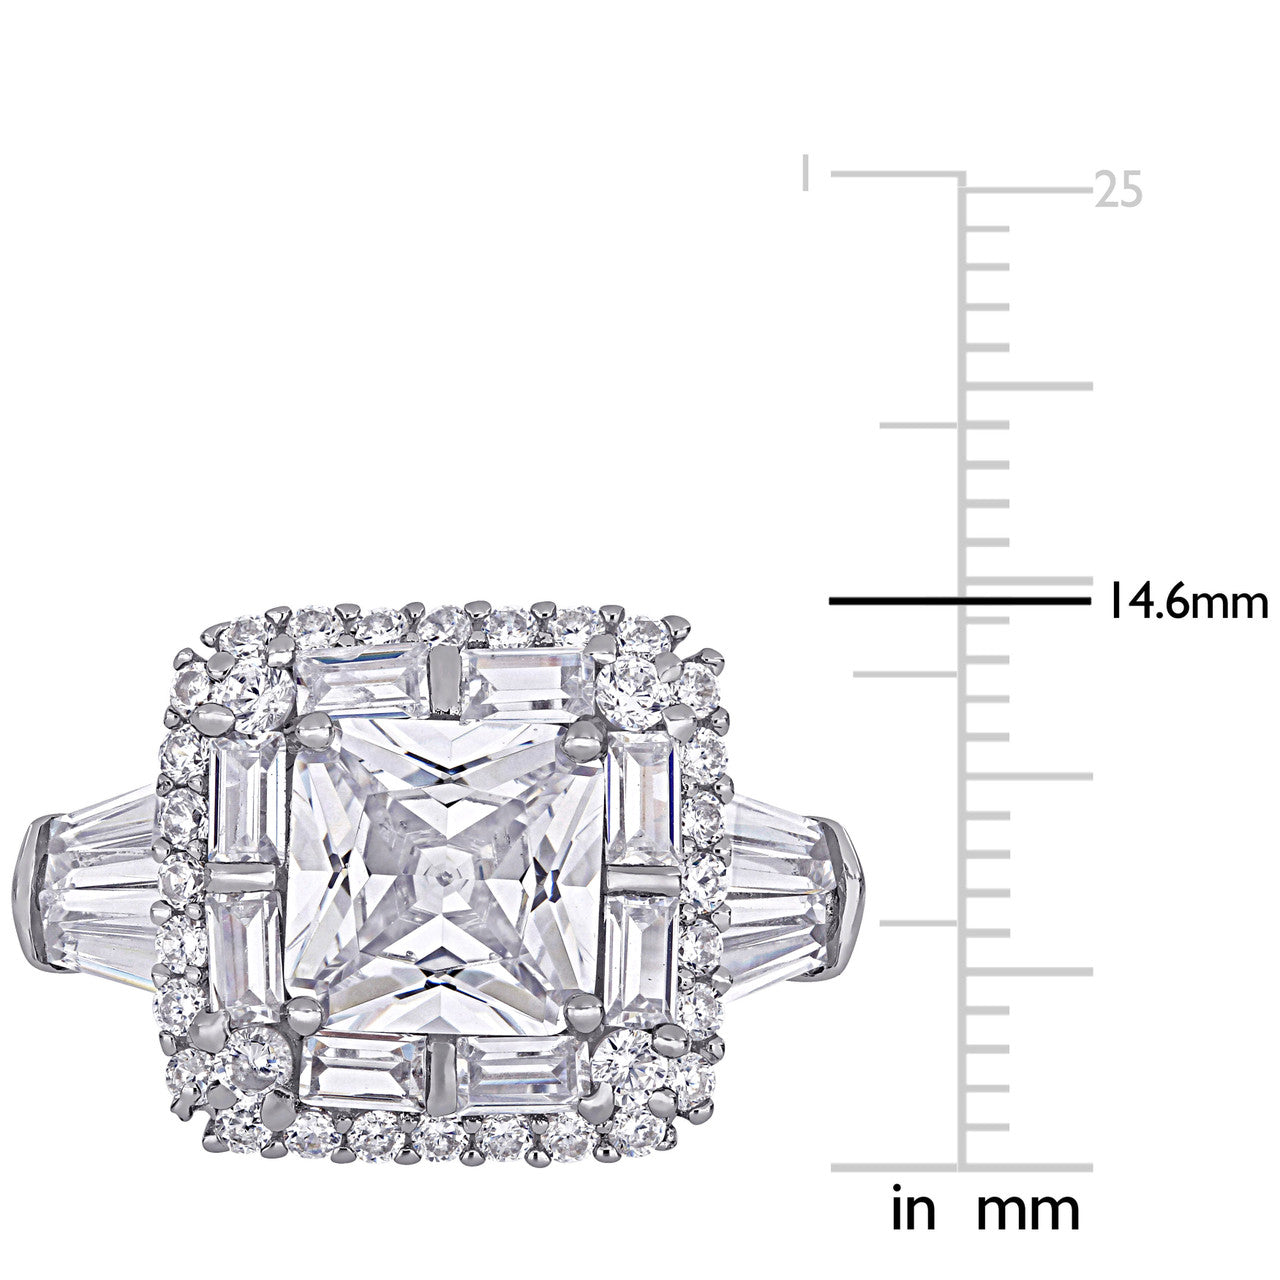 Ice Jewellery 8ct TGW Cubic Zirconia Cocktail Ring in Sterling Silver - 75000004630 | Ice Jewellery Australia